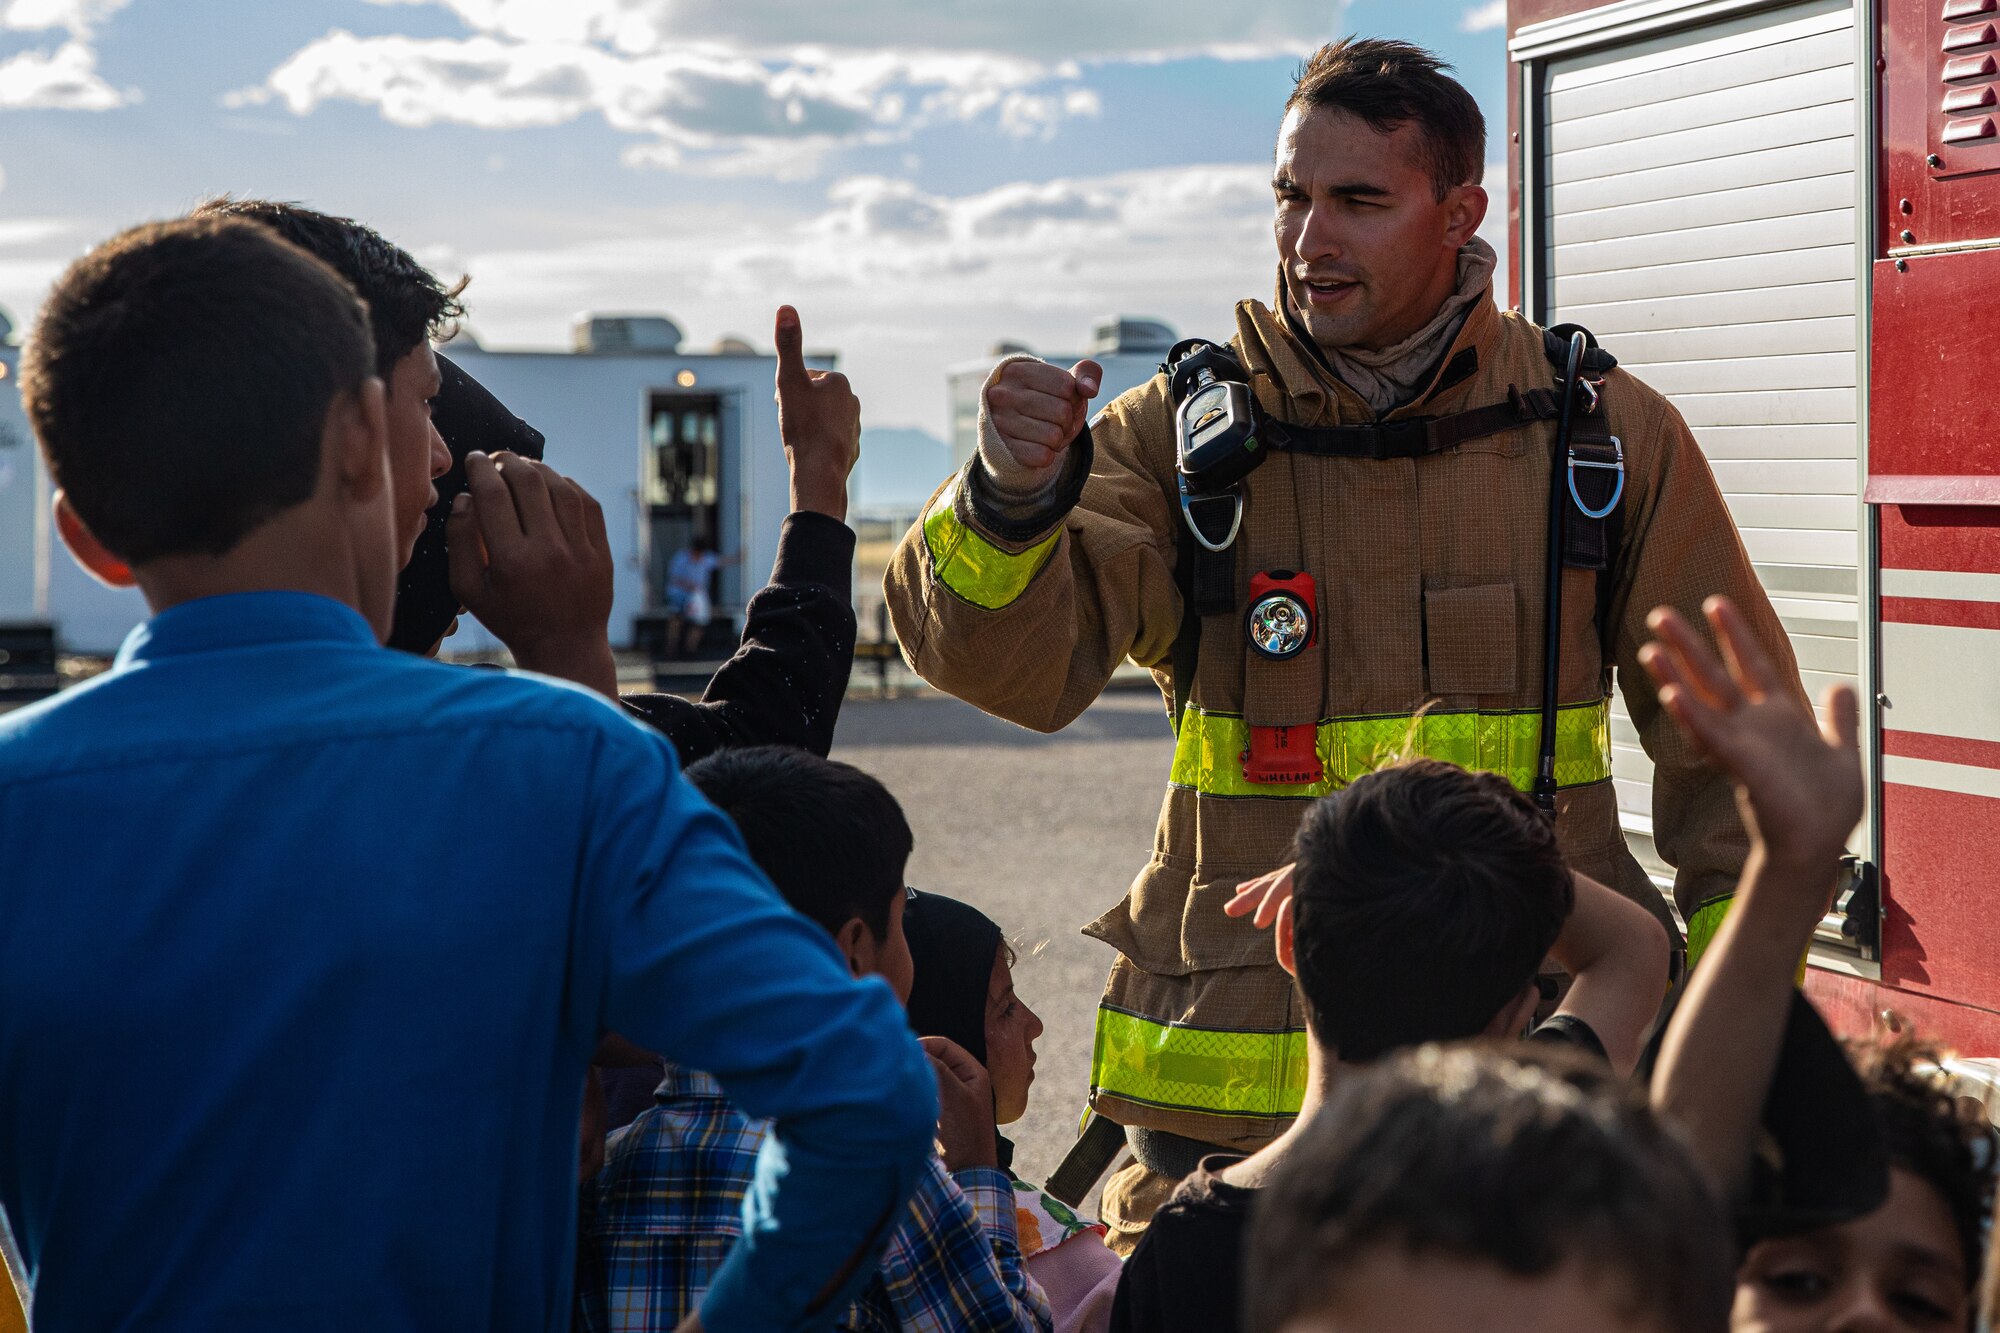 Tech. Sgt. Matt Whelan, Task Force-Holloman firefighter deployed from Seymour Johnson Air Force Base, North Carolina, gives a fist bump to Afghan children during a fire safety class at Aman Omid Village on Holloman Air Force Base, New Mexico, Oct. 11, 2021. The Department of Defense, through U.S. Northern Command, and in support of the Department of Homeland Security, is providing transportation, temporary housing, medical screening, and general support for at least 50,000 Afghan evacuees at suitable facilities, in permanent or temporary structures, as quickly as possible. This initiative provides Afghan personnel essential support at secure locations outside Afghanistan. (U.S. Army photo by Pfc. Anthony Sanchez)